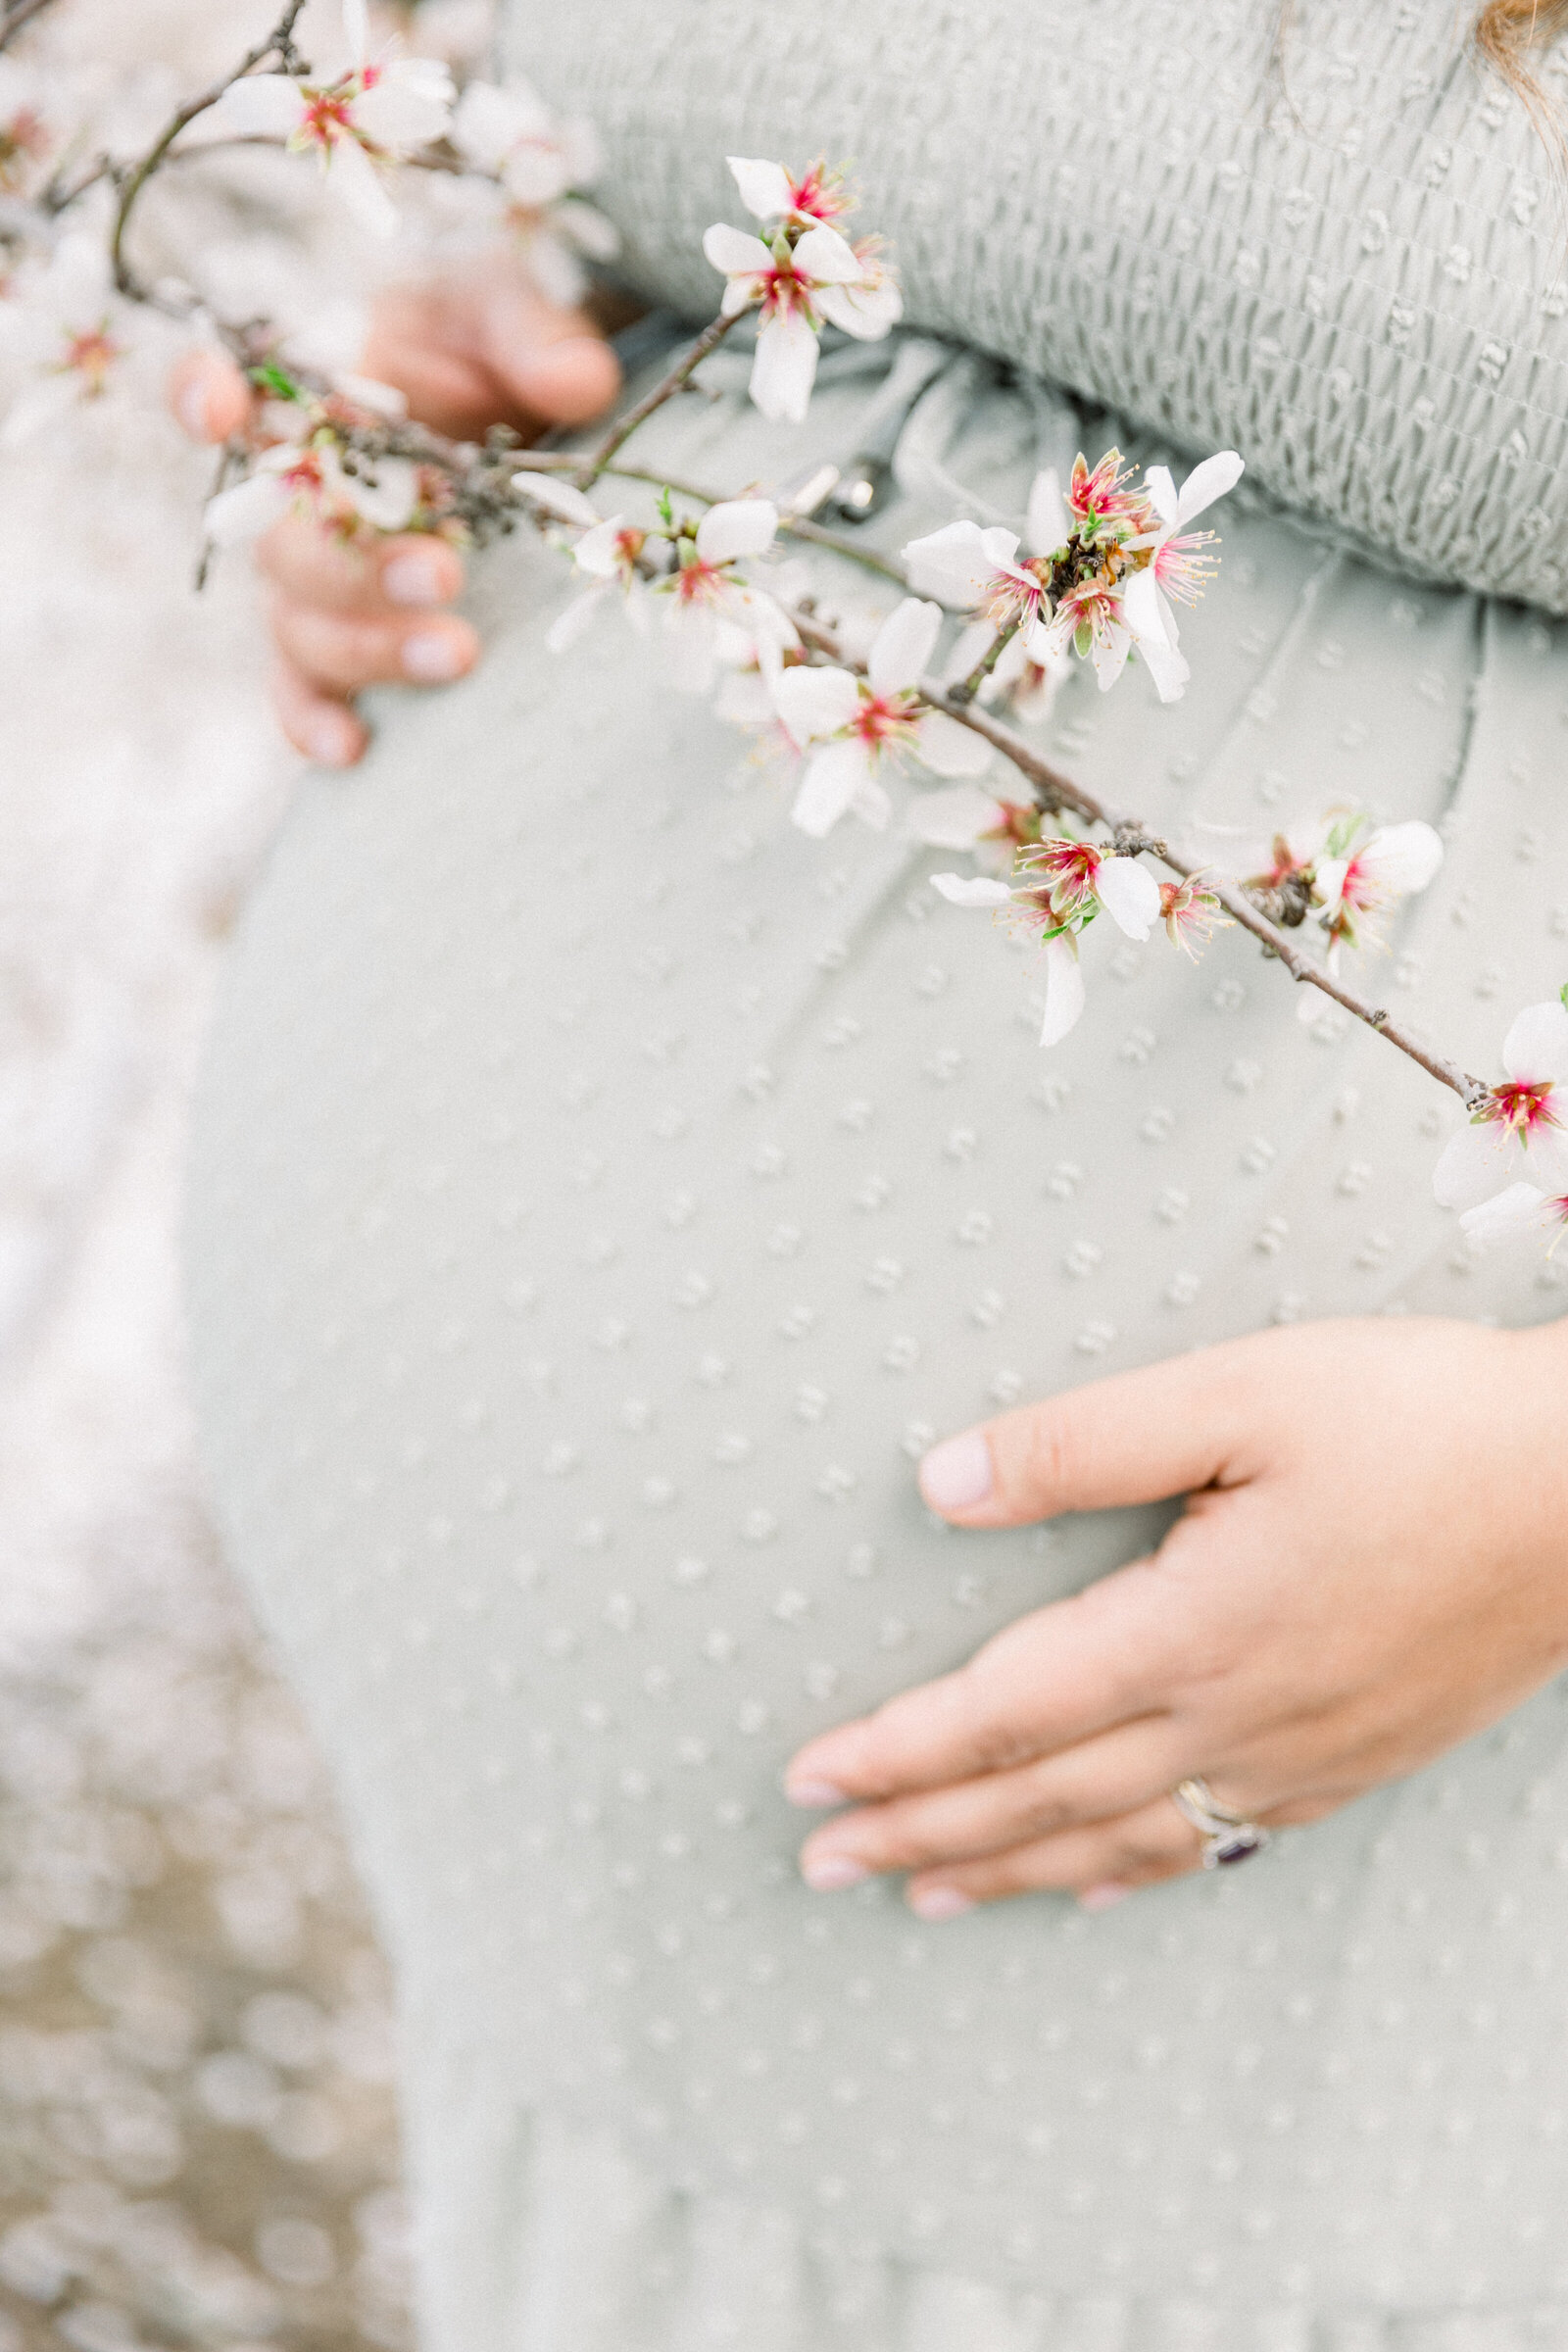 Image of exprcting mothers belly along with almond blossoms taken by Sacramento Newborn Photographer Kelsey Krall